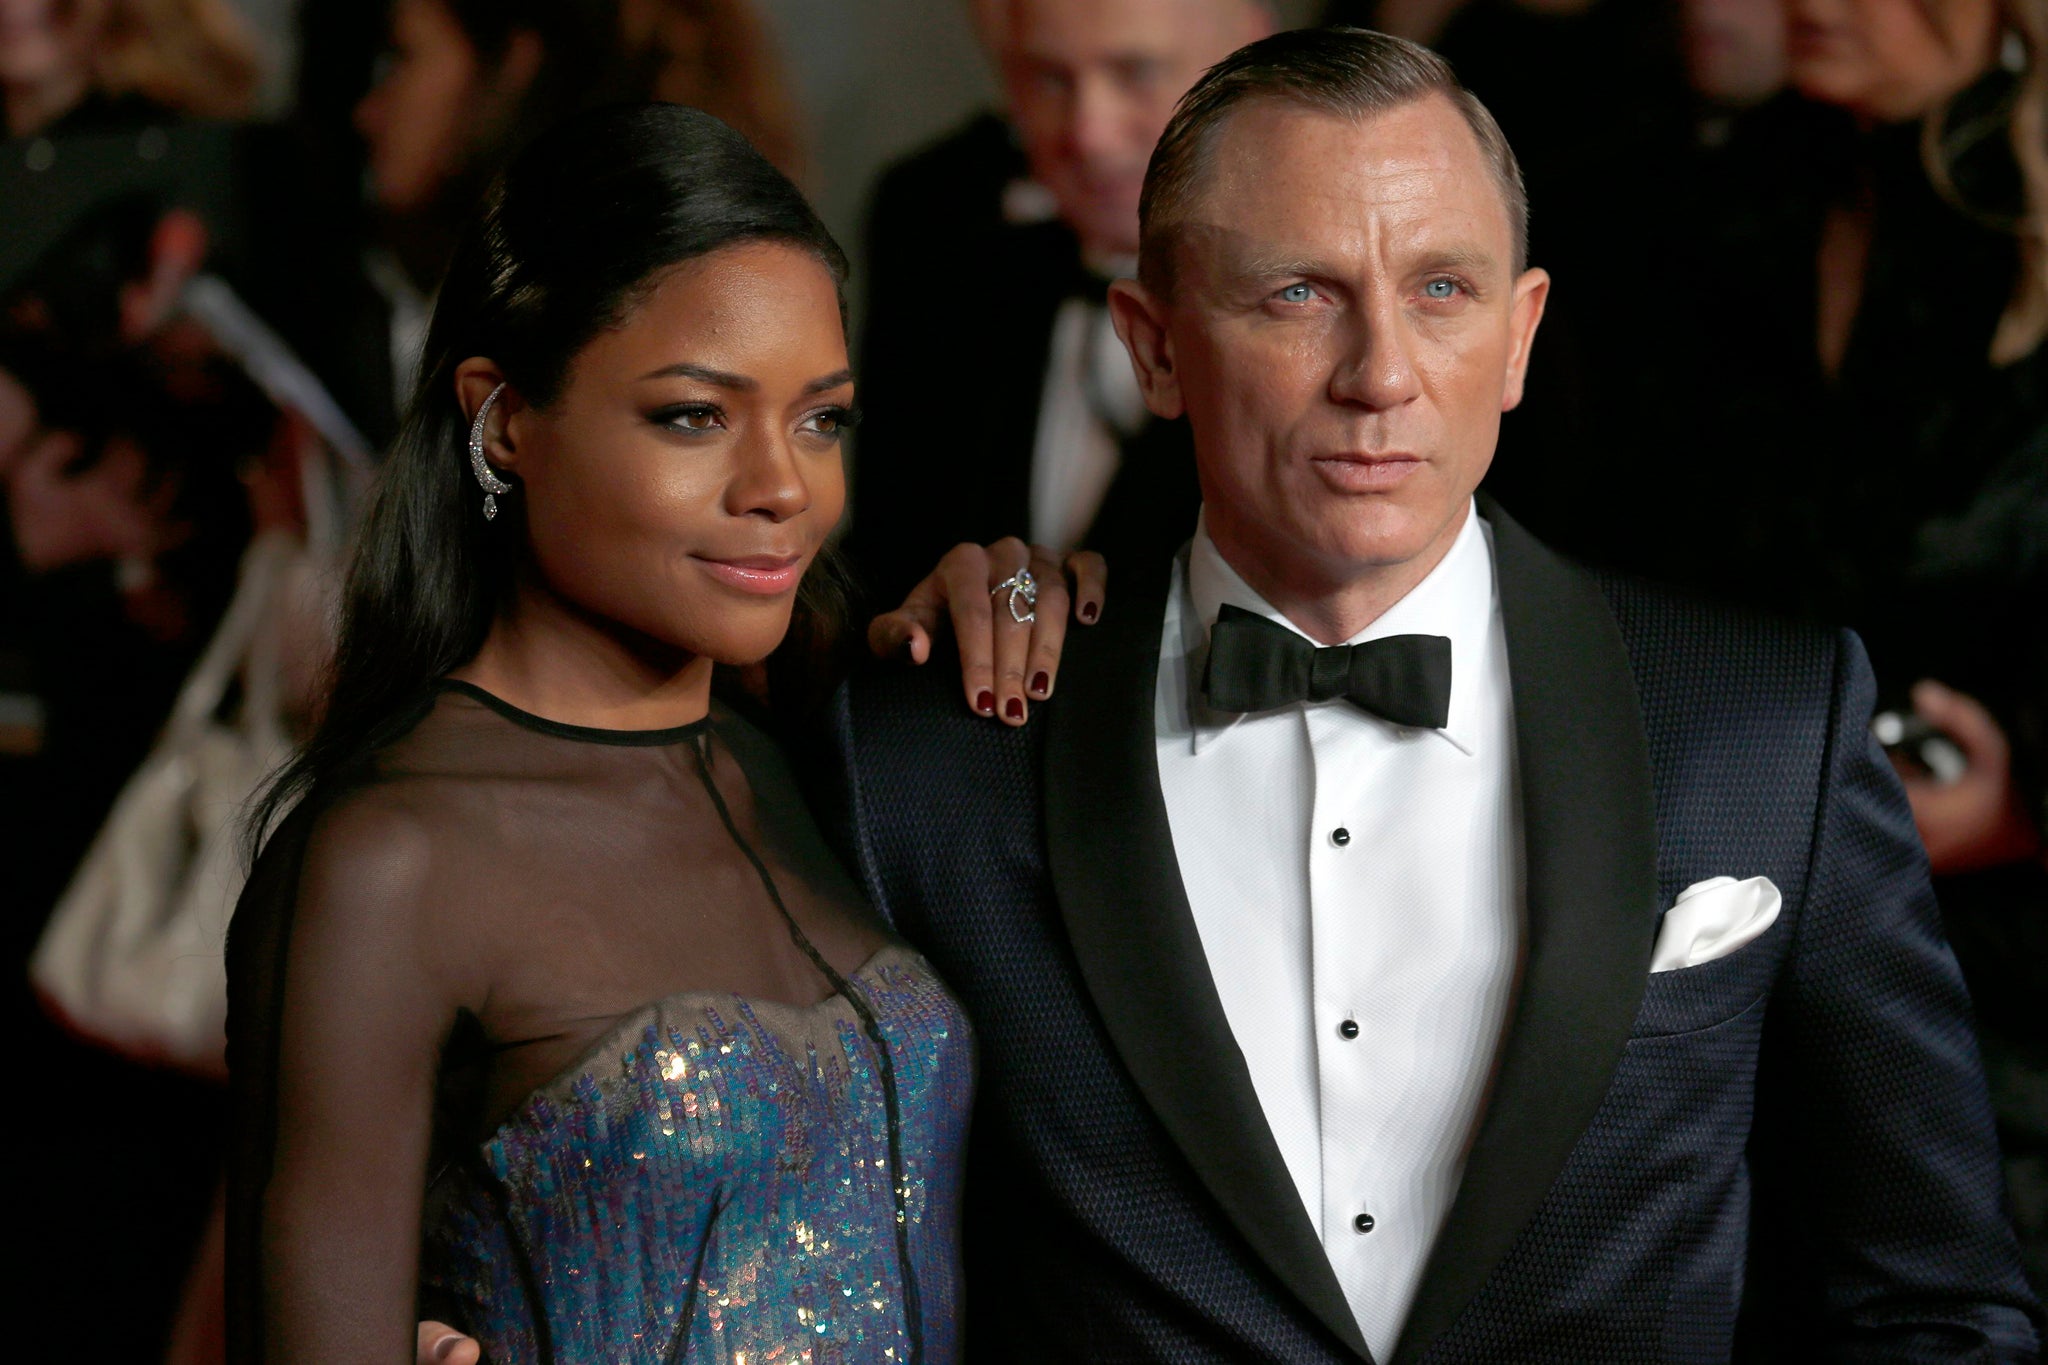 Actor Daniel Craig and actress Naomie Harris by Suzanne Plunkett.